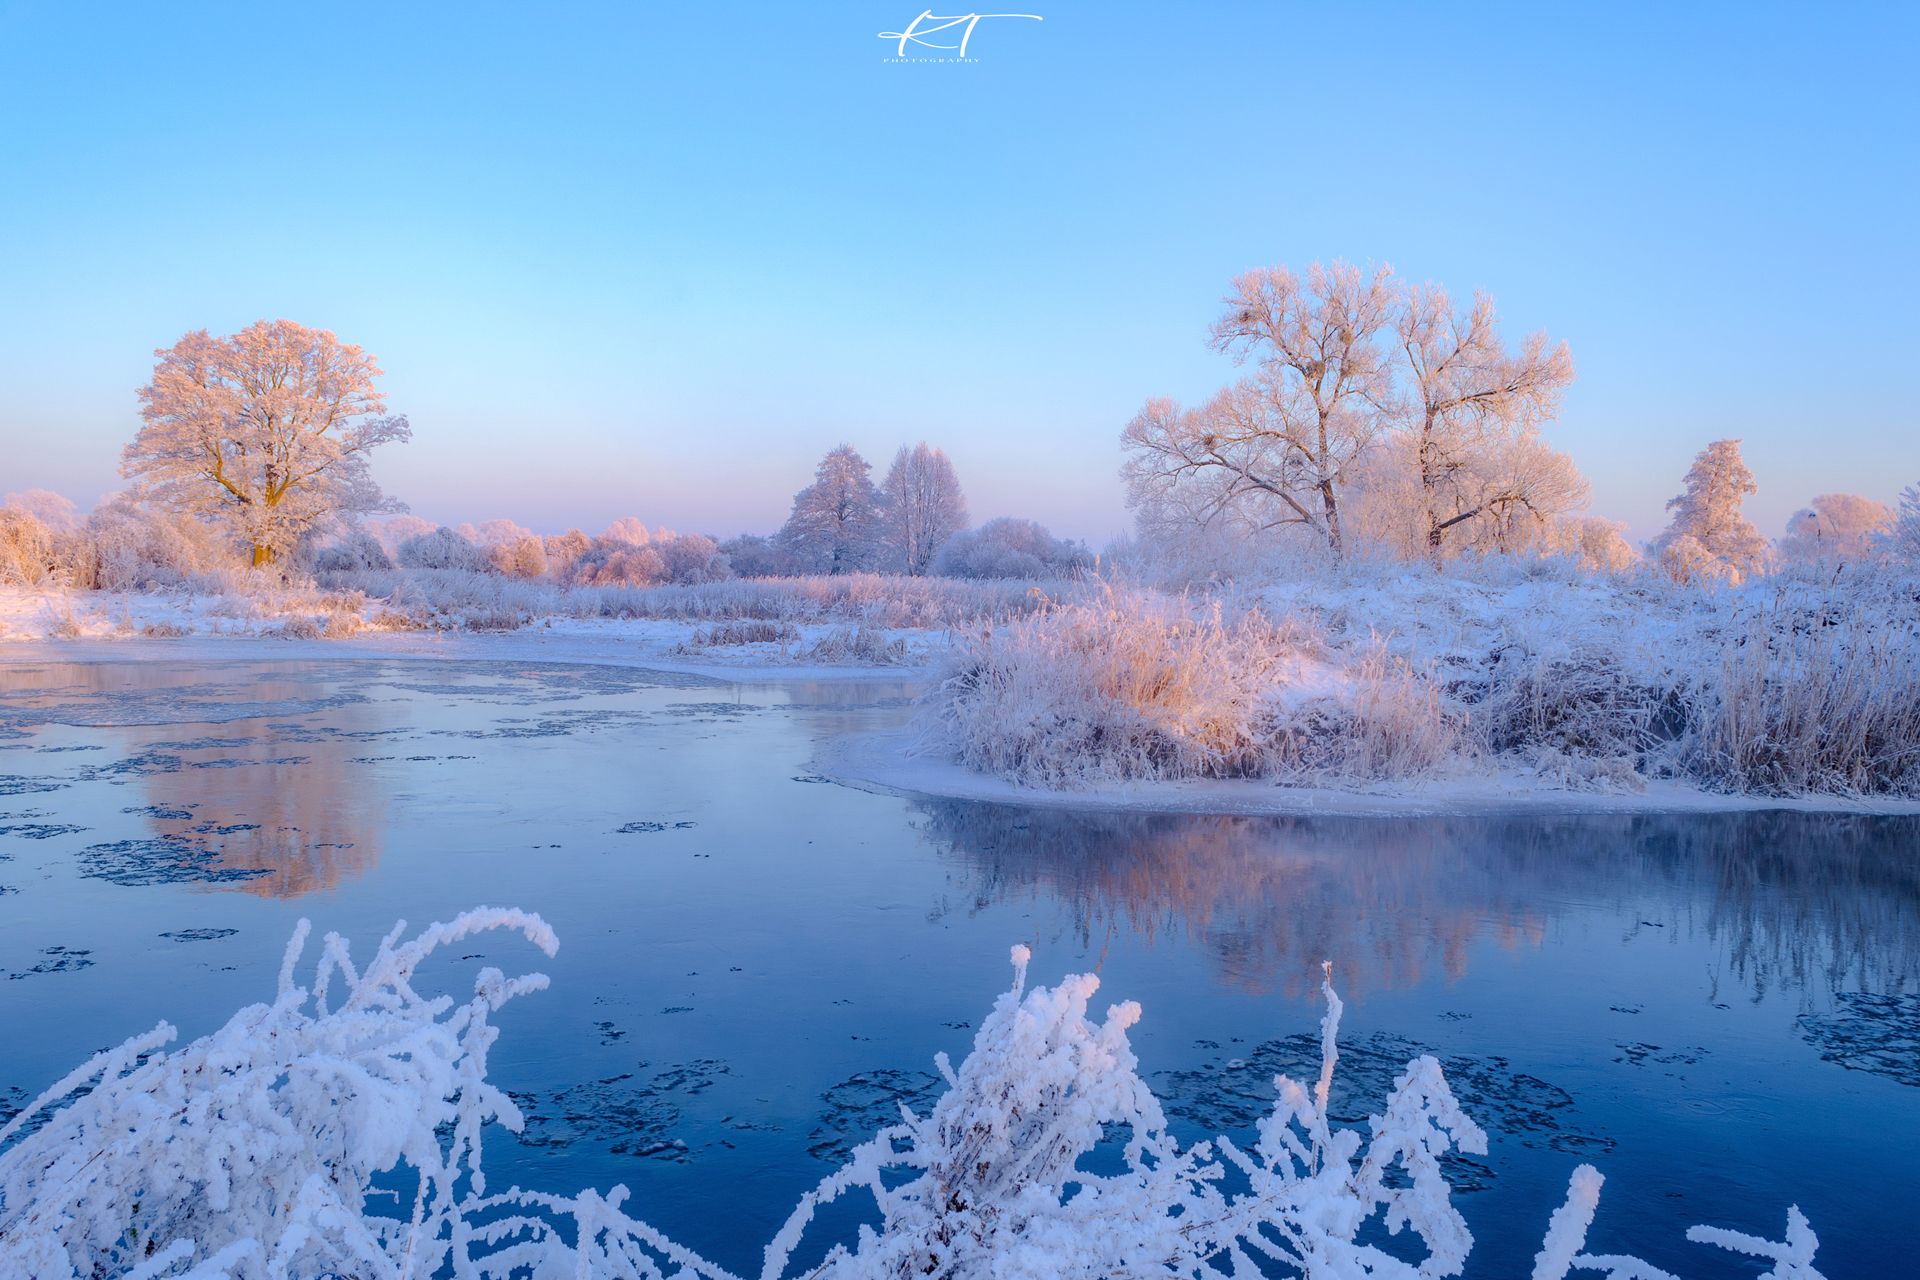 winter  river  Gwda  landscape  frost  water  trees  sky  reflection in water  snow  morning  calm  light  No People  Landscape - Scenery  Scenics - Nature  Photography, Tollas Krzysztof